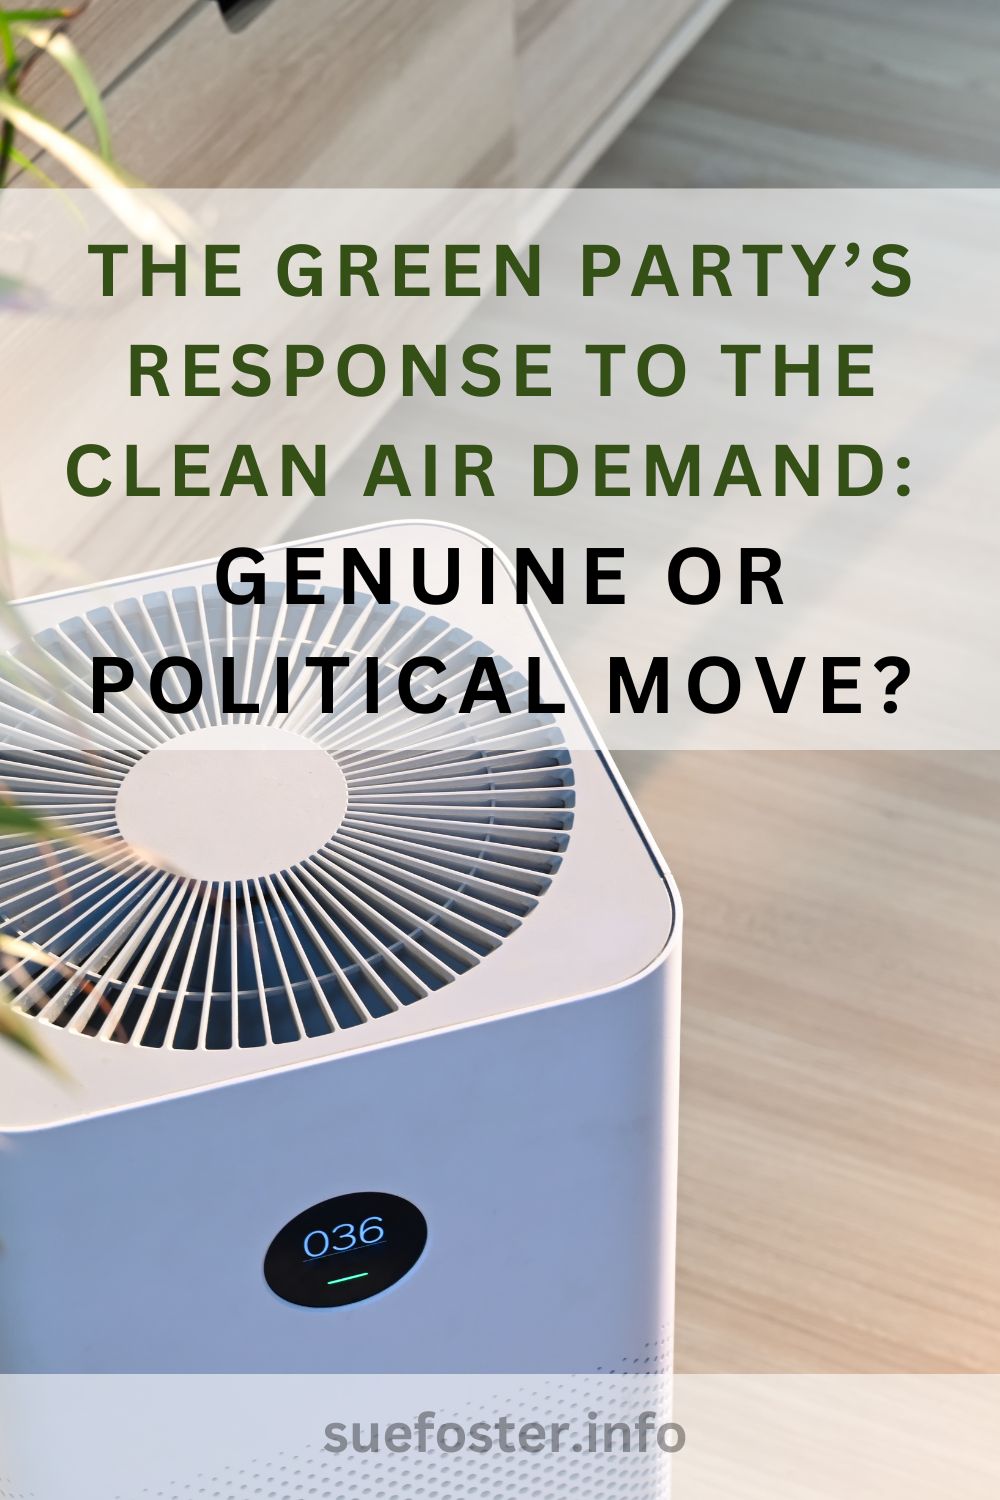 Explore the Green Party's recent interest in clean air on X (Twitter). Despite newfound concern, discrepancies between words and actions raise scepticism. Will they truly champion clean air, or is it a political move?